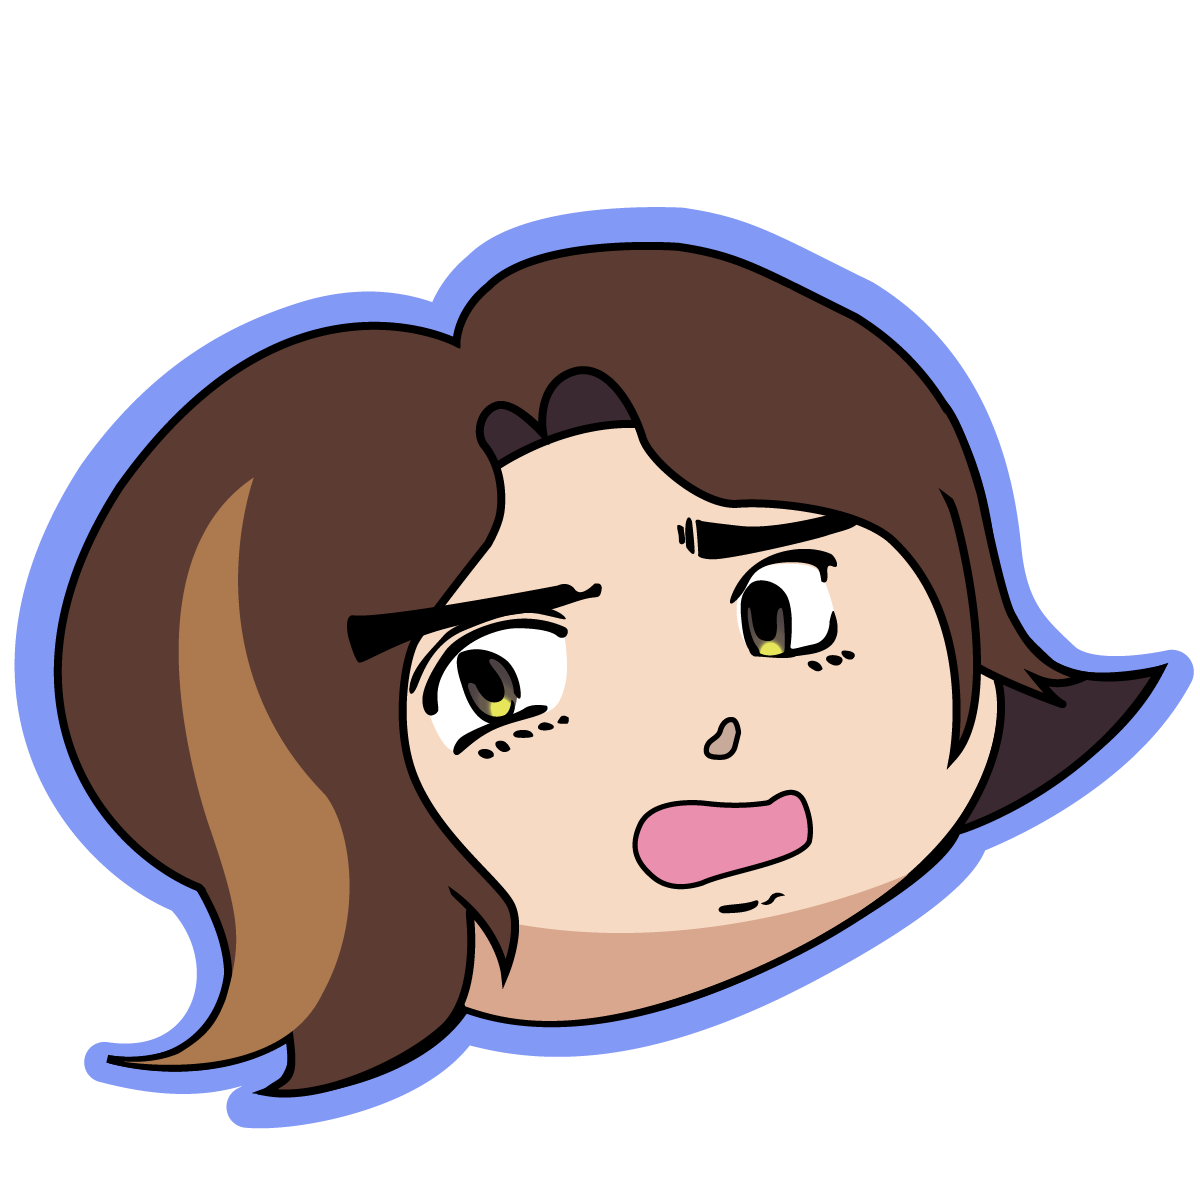 Image - Arin Gorp Grumps.png | Game Grumps Wiki | FANDOM powered by Wikia